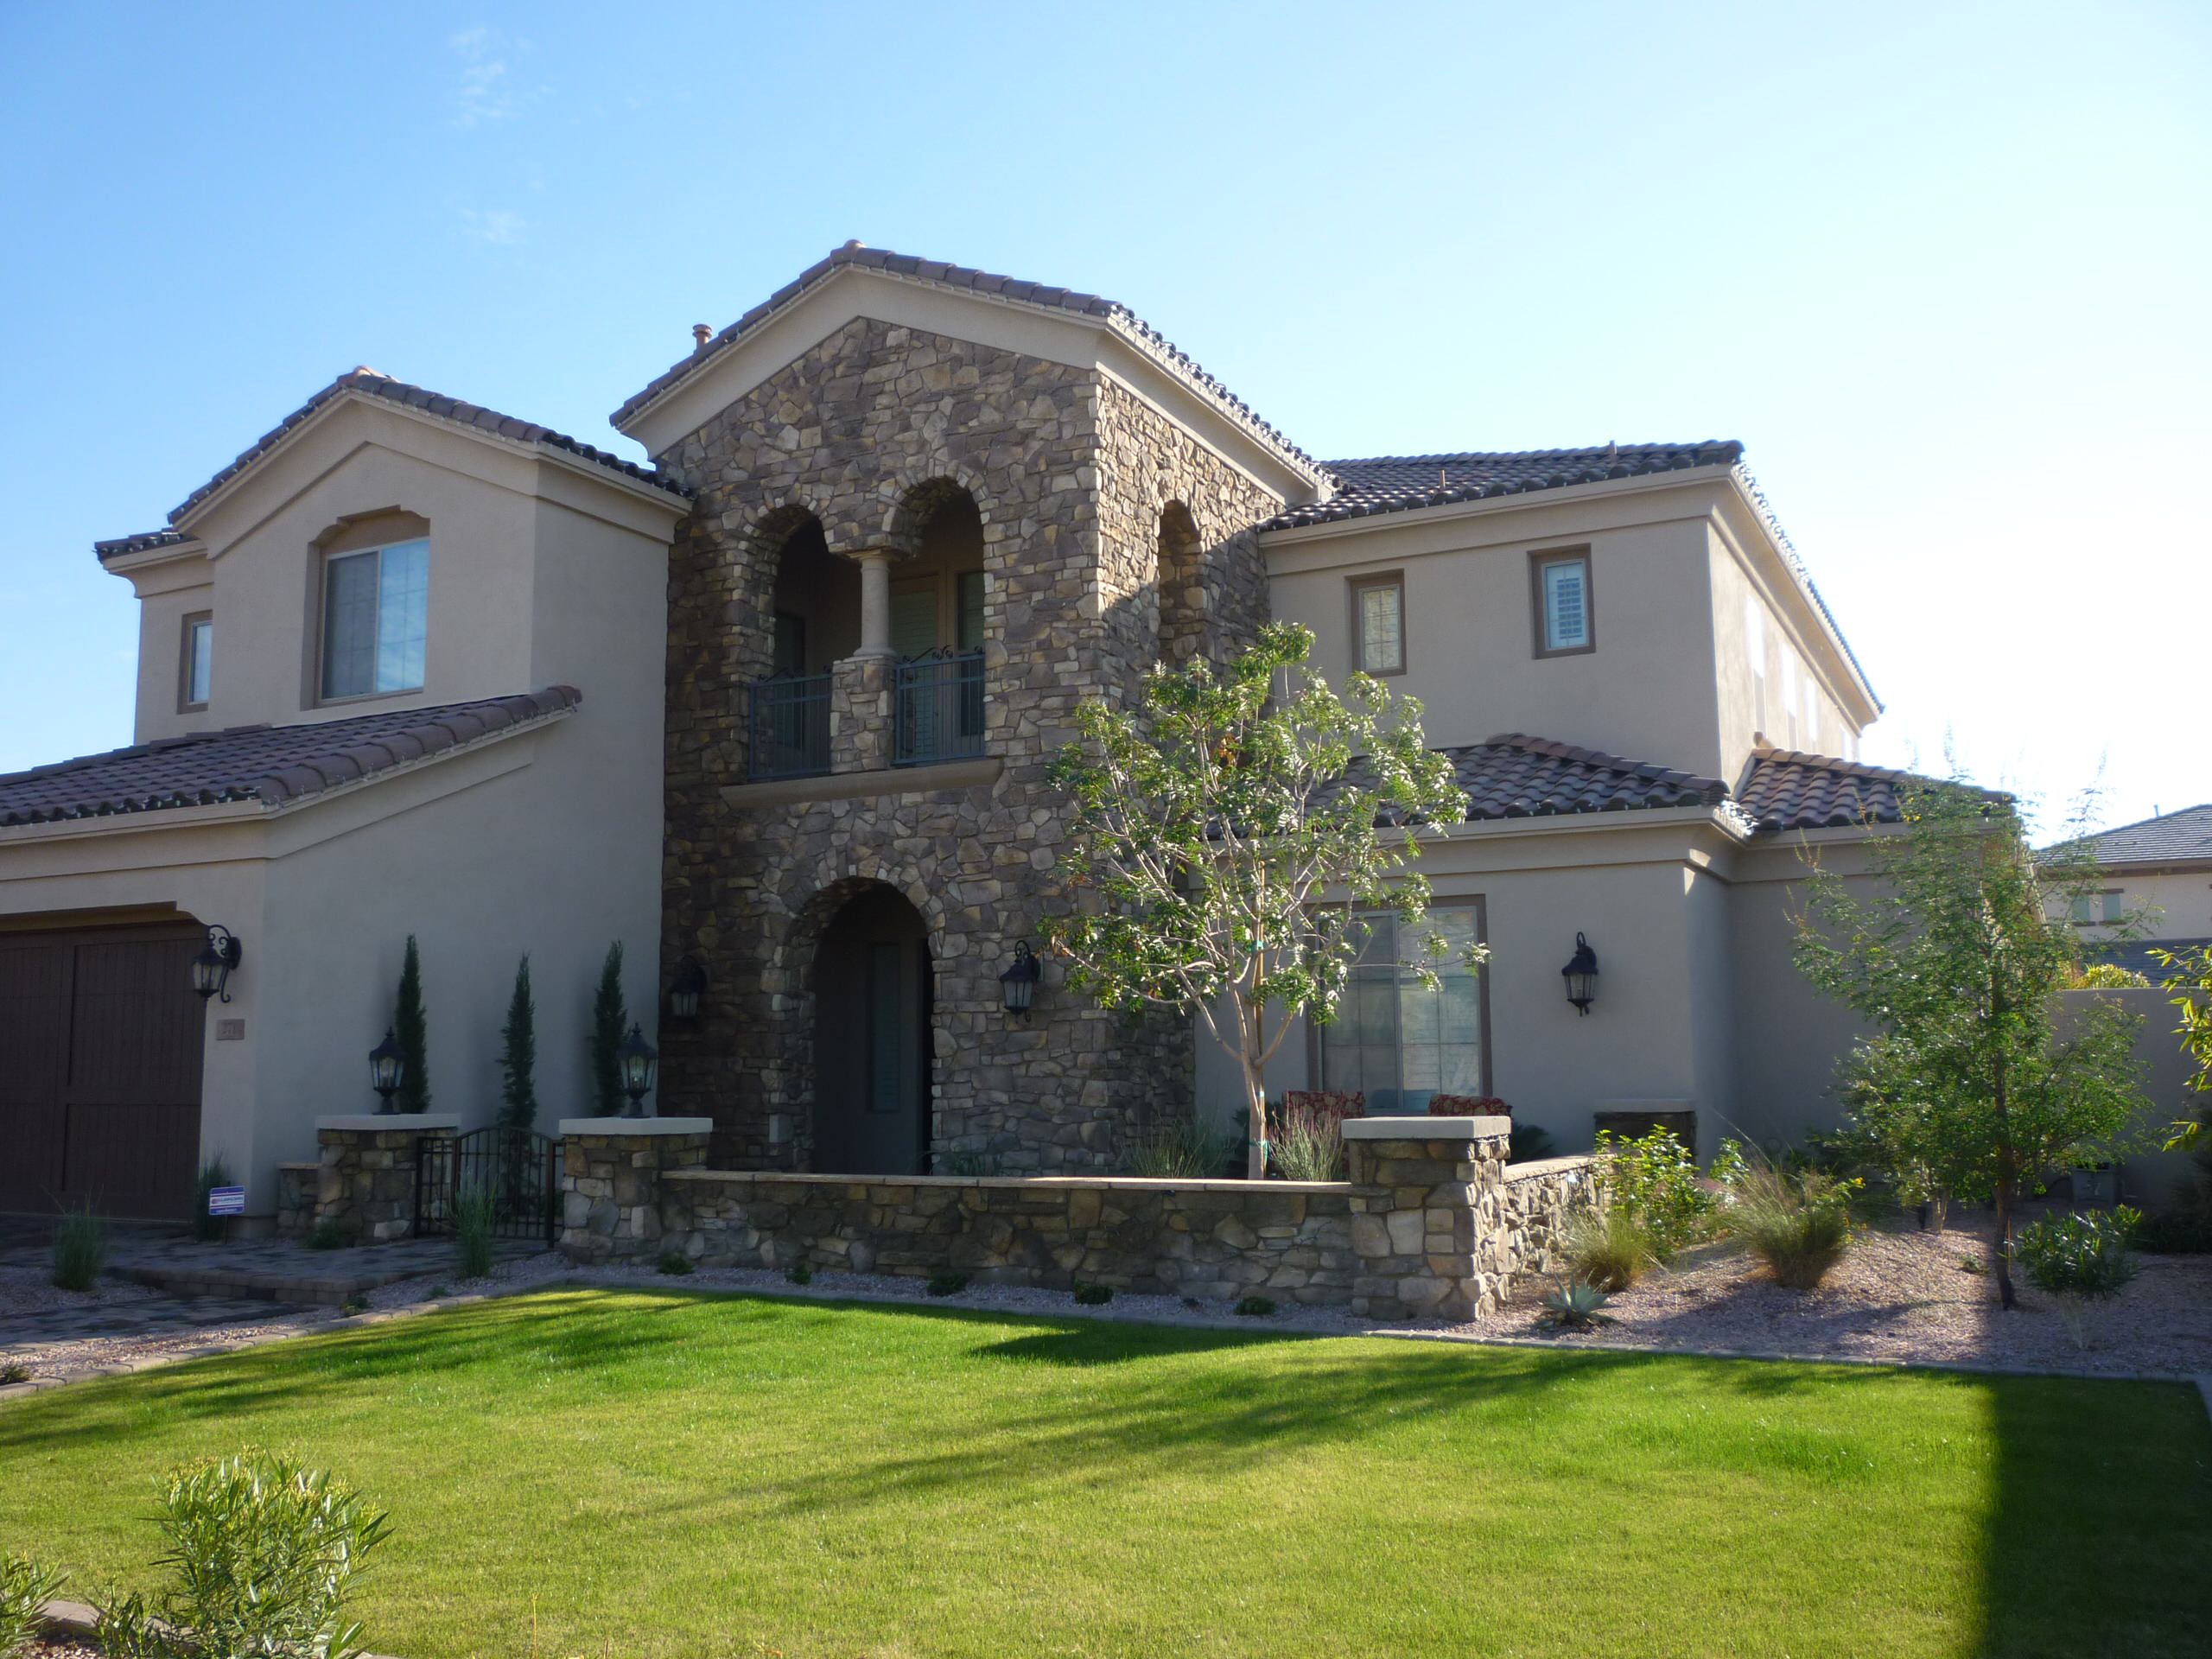 Front Landscape, Wall, & Stone Work